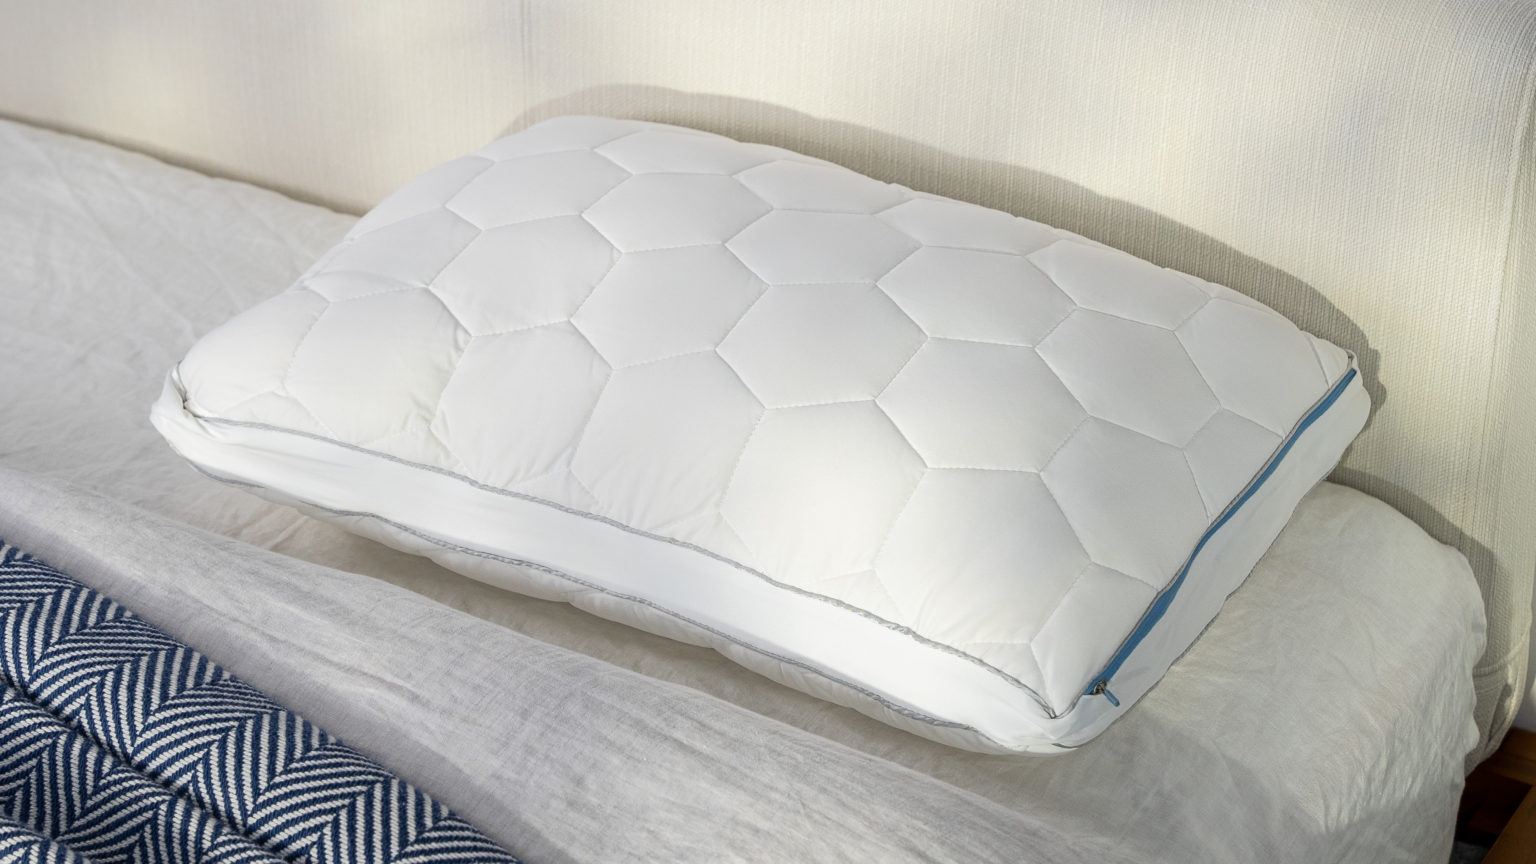 A picture of the SHEEX Original Performance Down Alternative Side Sleeper Pillow in Sleep Foundation's test lab.